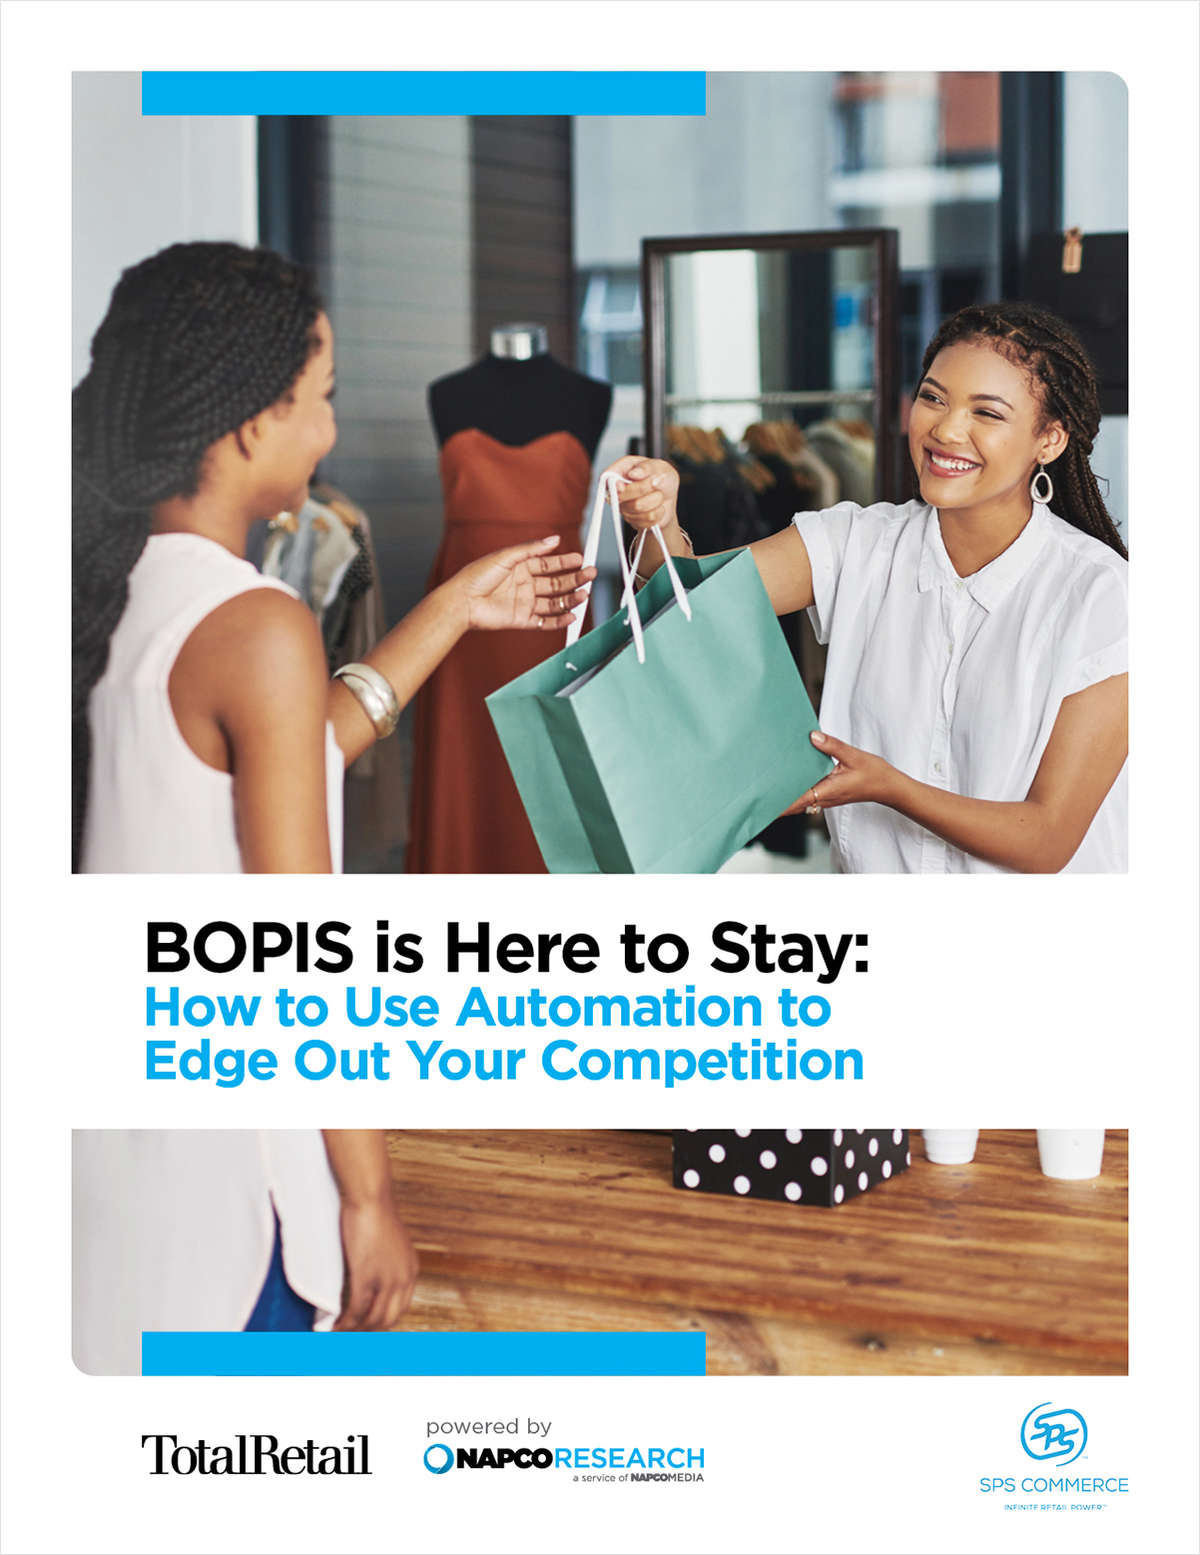 BOPIS is Here to Stay: How to Use Automation to Edge Out Your Competition